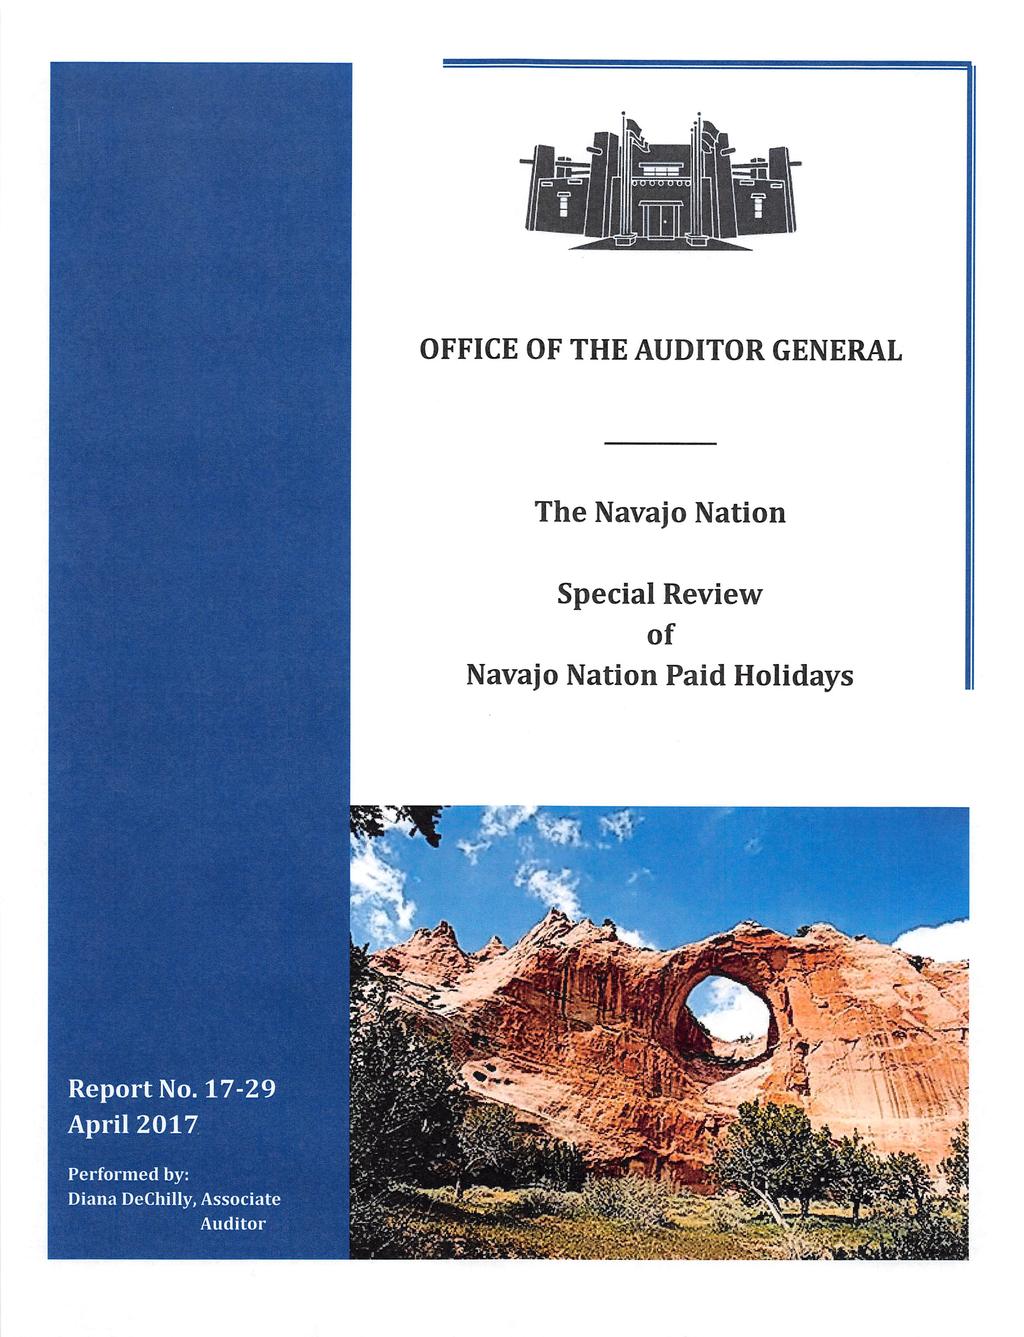 OFFICE OF THE AUDITOR GENERAL The Special Review of Paid Holidays